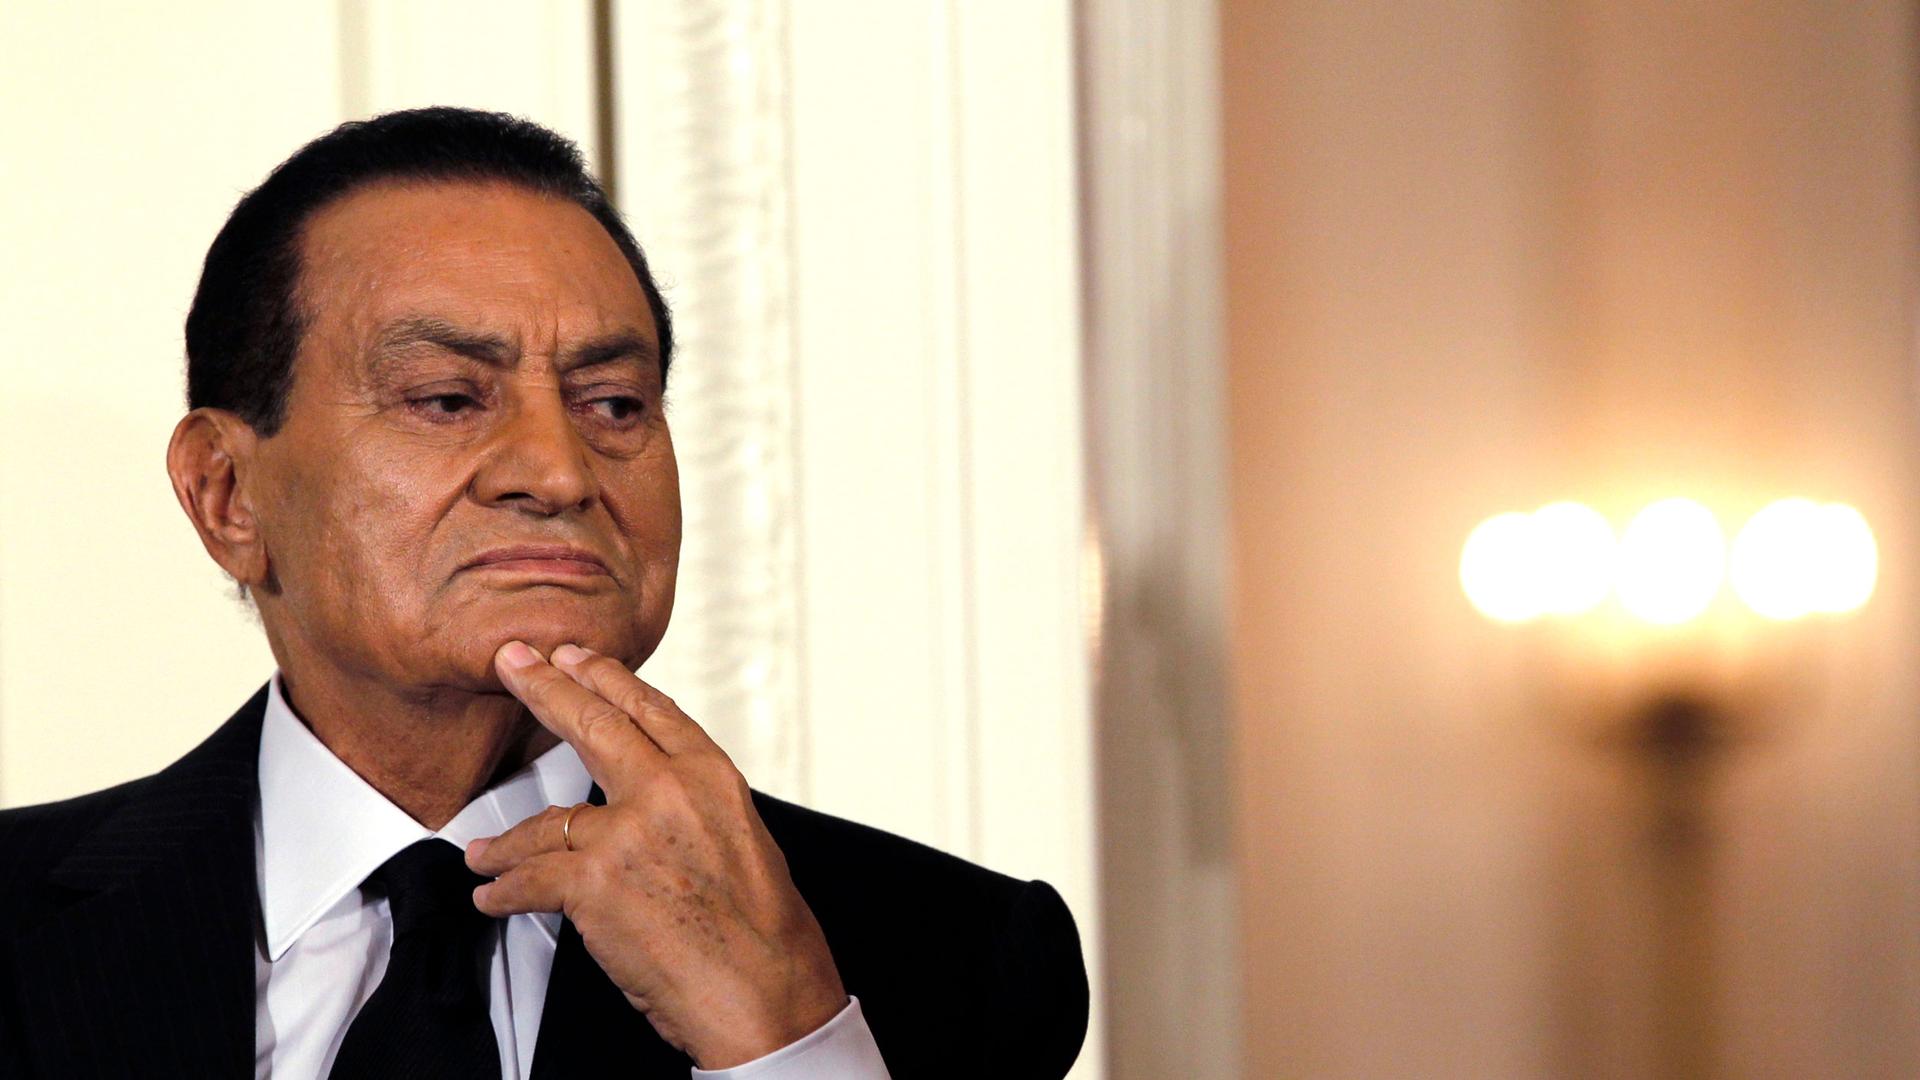 Hosni Mubarak is shown in a close up photograph looking to his left with his chin resting on his hand.